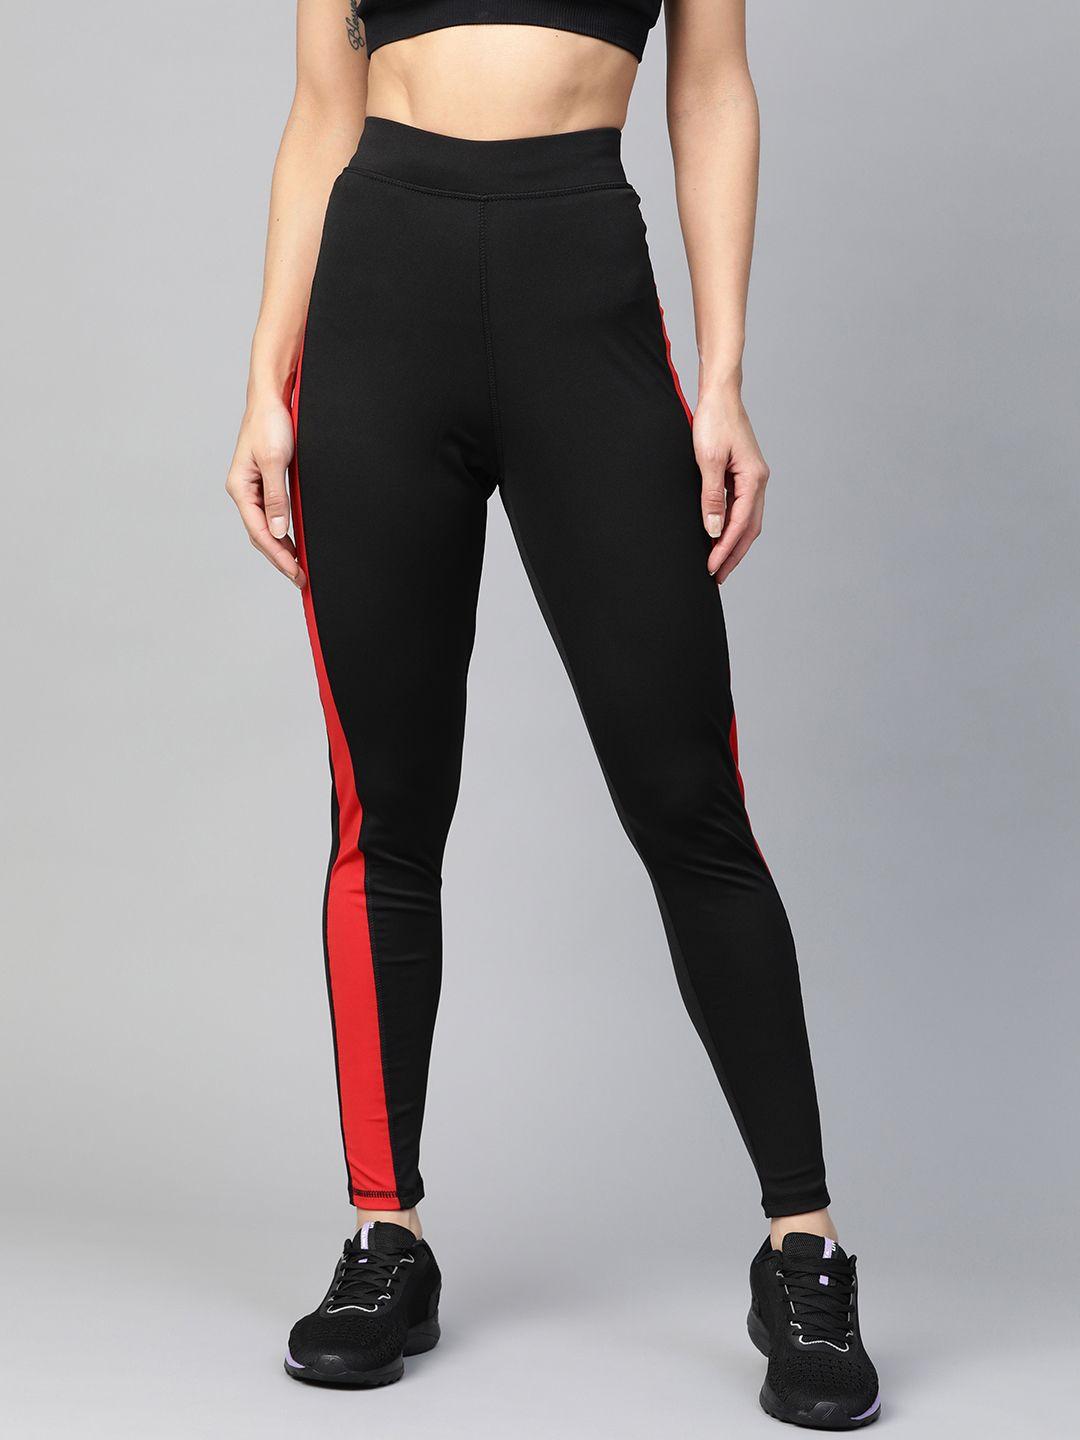 m7 by metronaut women black high-rise solid training tights